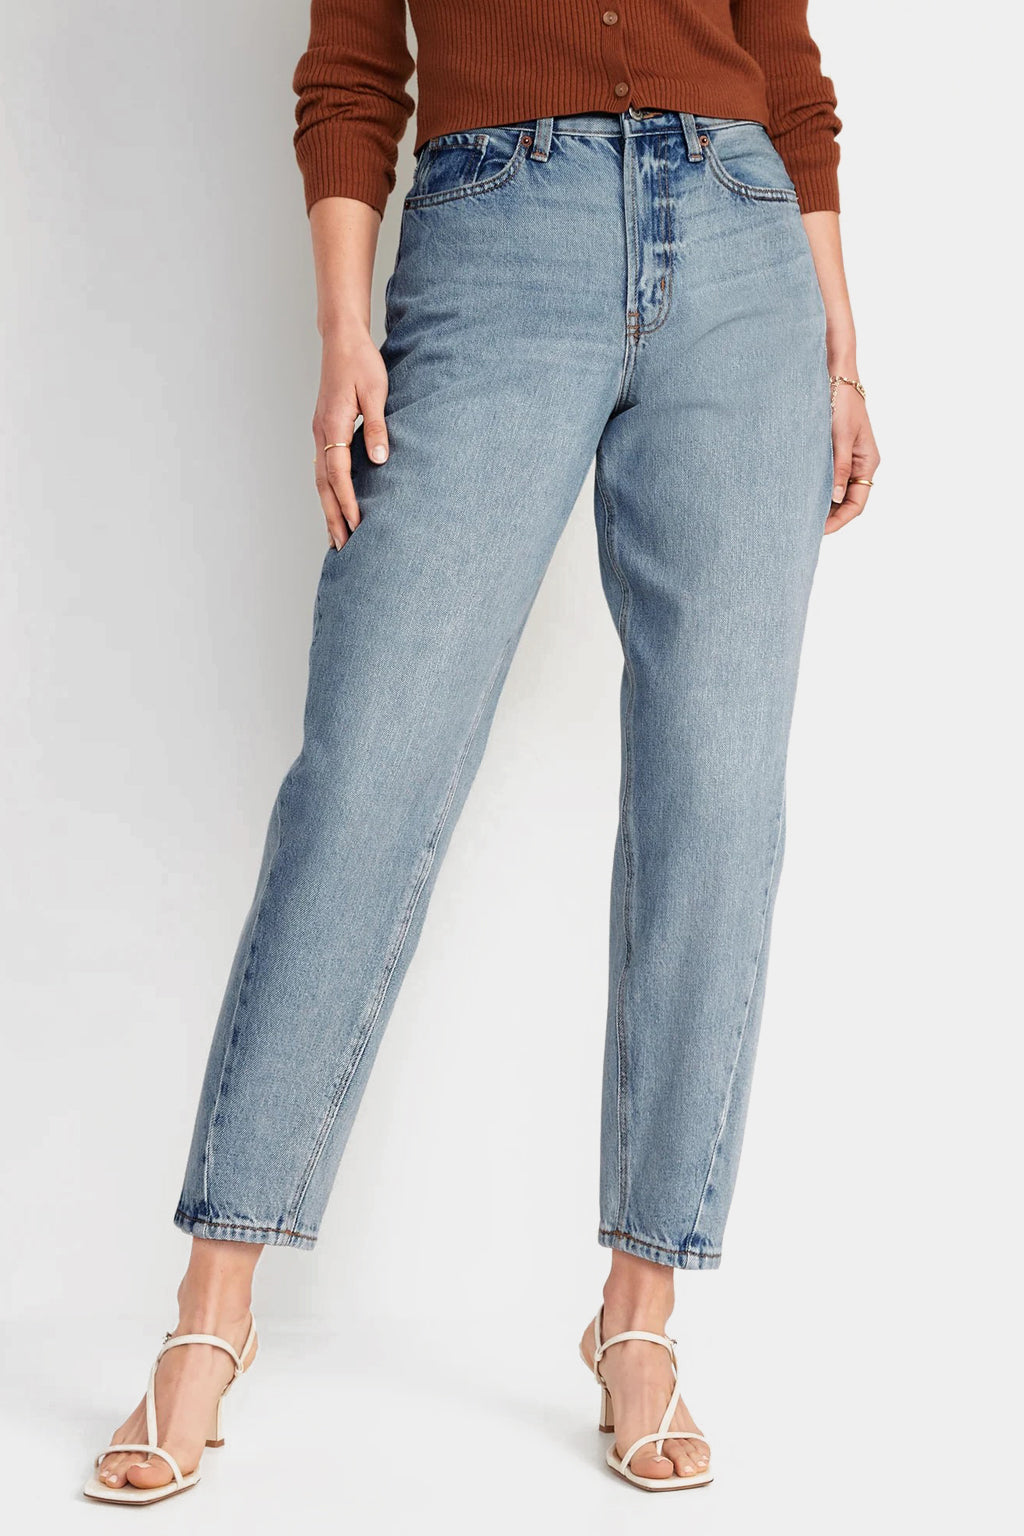 Old Navy - Extra High-Waisted Non-Stretch Balloon Jeans for Women